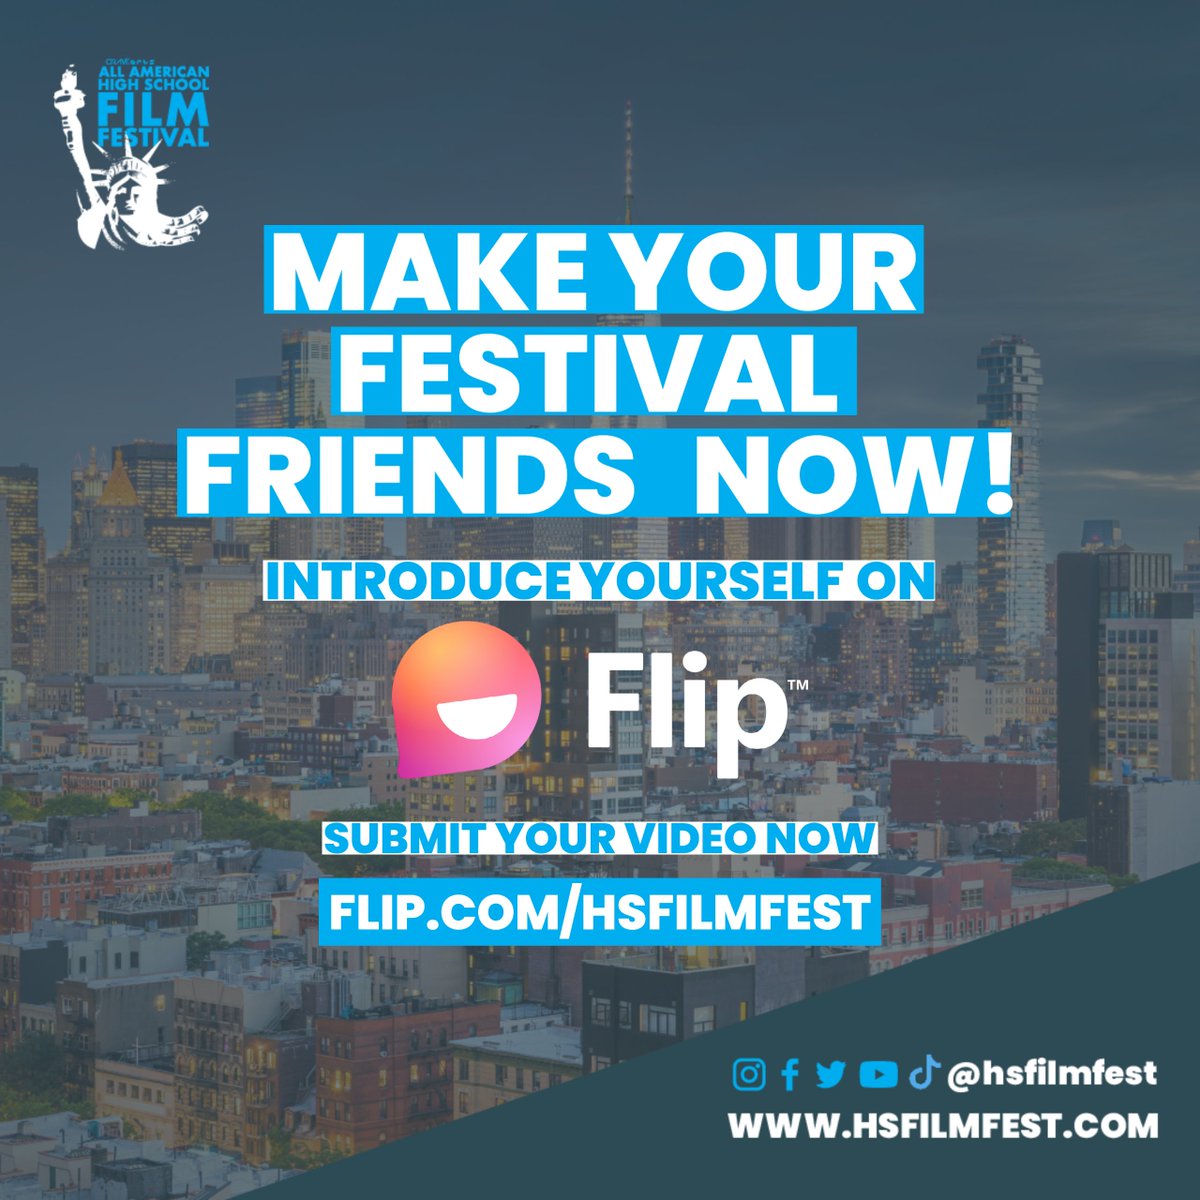 If you plan on attending the 2022 AAHSFF you can start your experience RIGHT NOW! Just sign up for Microsoft Flip and share a video introducing yourself to other attendees from all over the world. Submit your video now: flip.com/hsfilmfest #AAHSFF2022 #NeverStopCreating